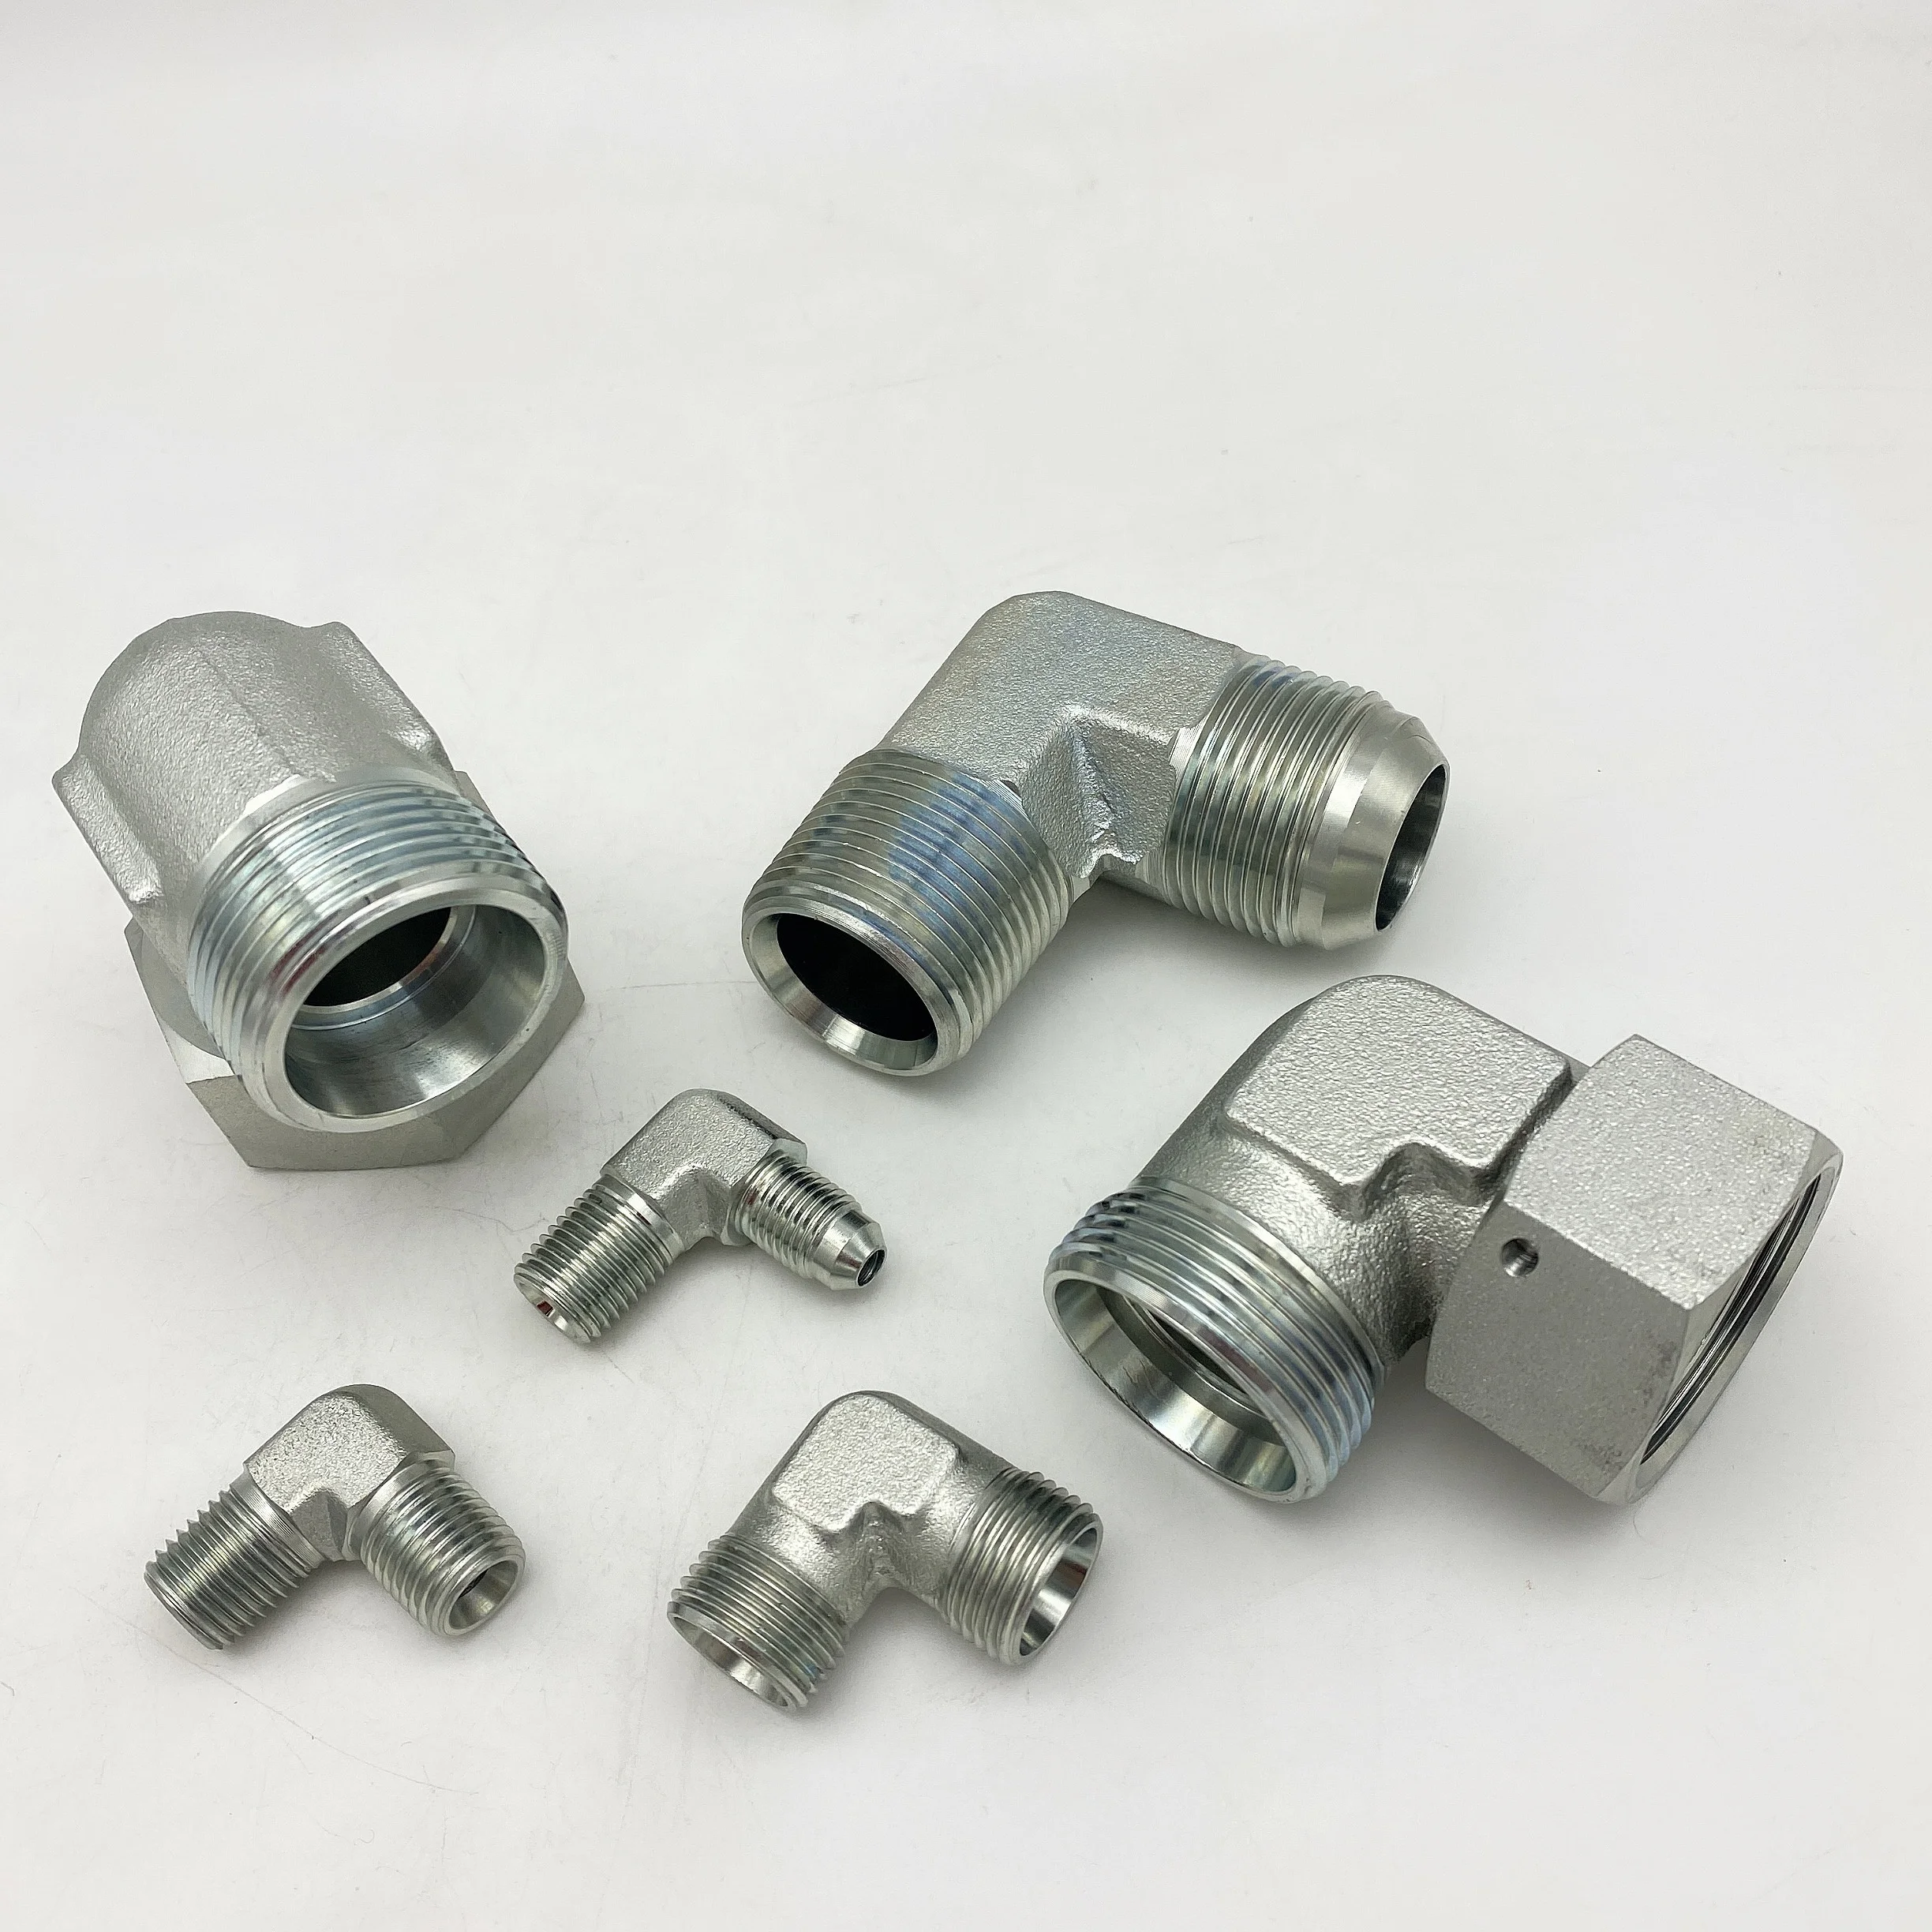 

1JN9 JIC Stainless steel Hydraulic Pipe Tube Fittings Hydraulic Hose Connector 90 Degree Elbow NPT Male Hydraulic Hose Adapter